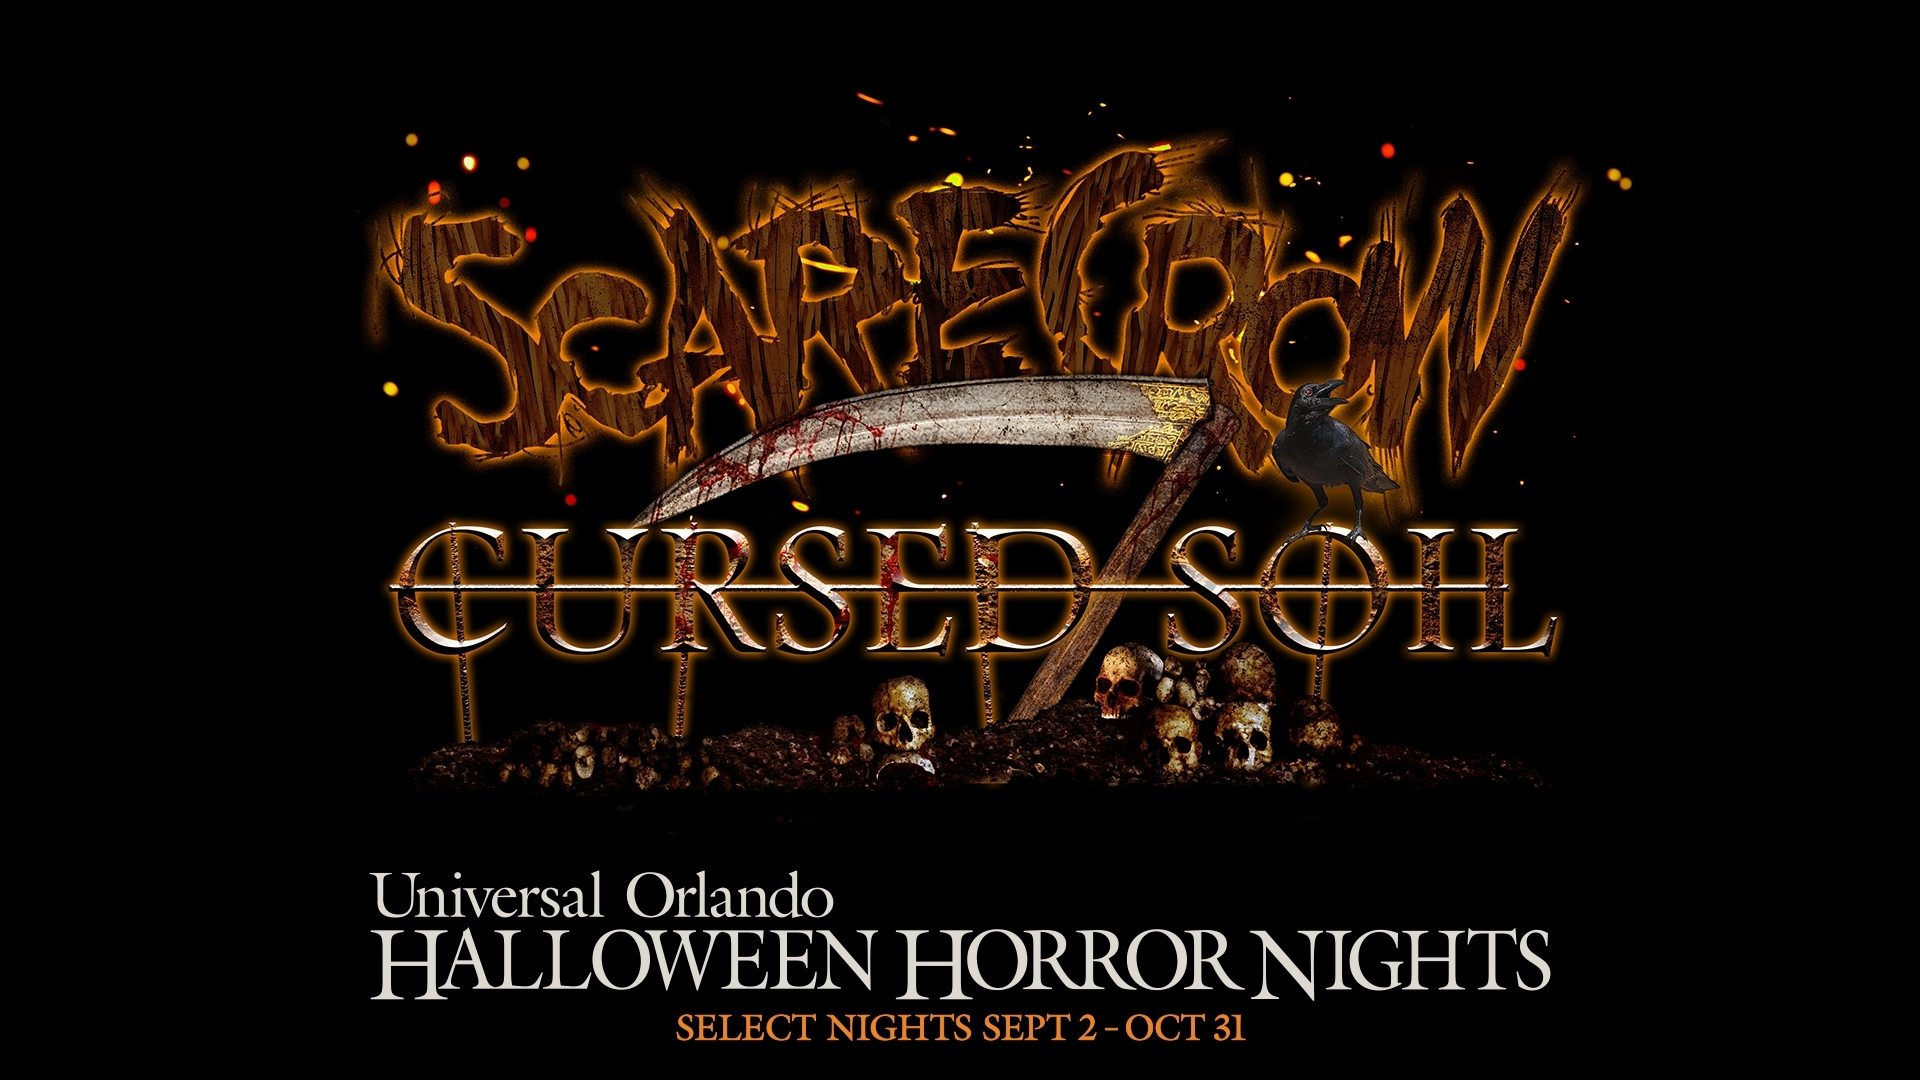 Scarecrow Cursed Soil Scare Zone Universal Studios HHN 31 Halloween Horror Nights 2022 UOR Photos. Keep reading to get the best Halloween Horror Nights tips and tricks and survival guide.